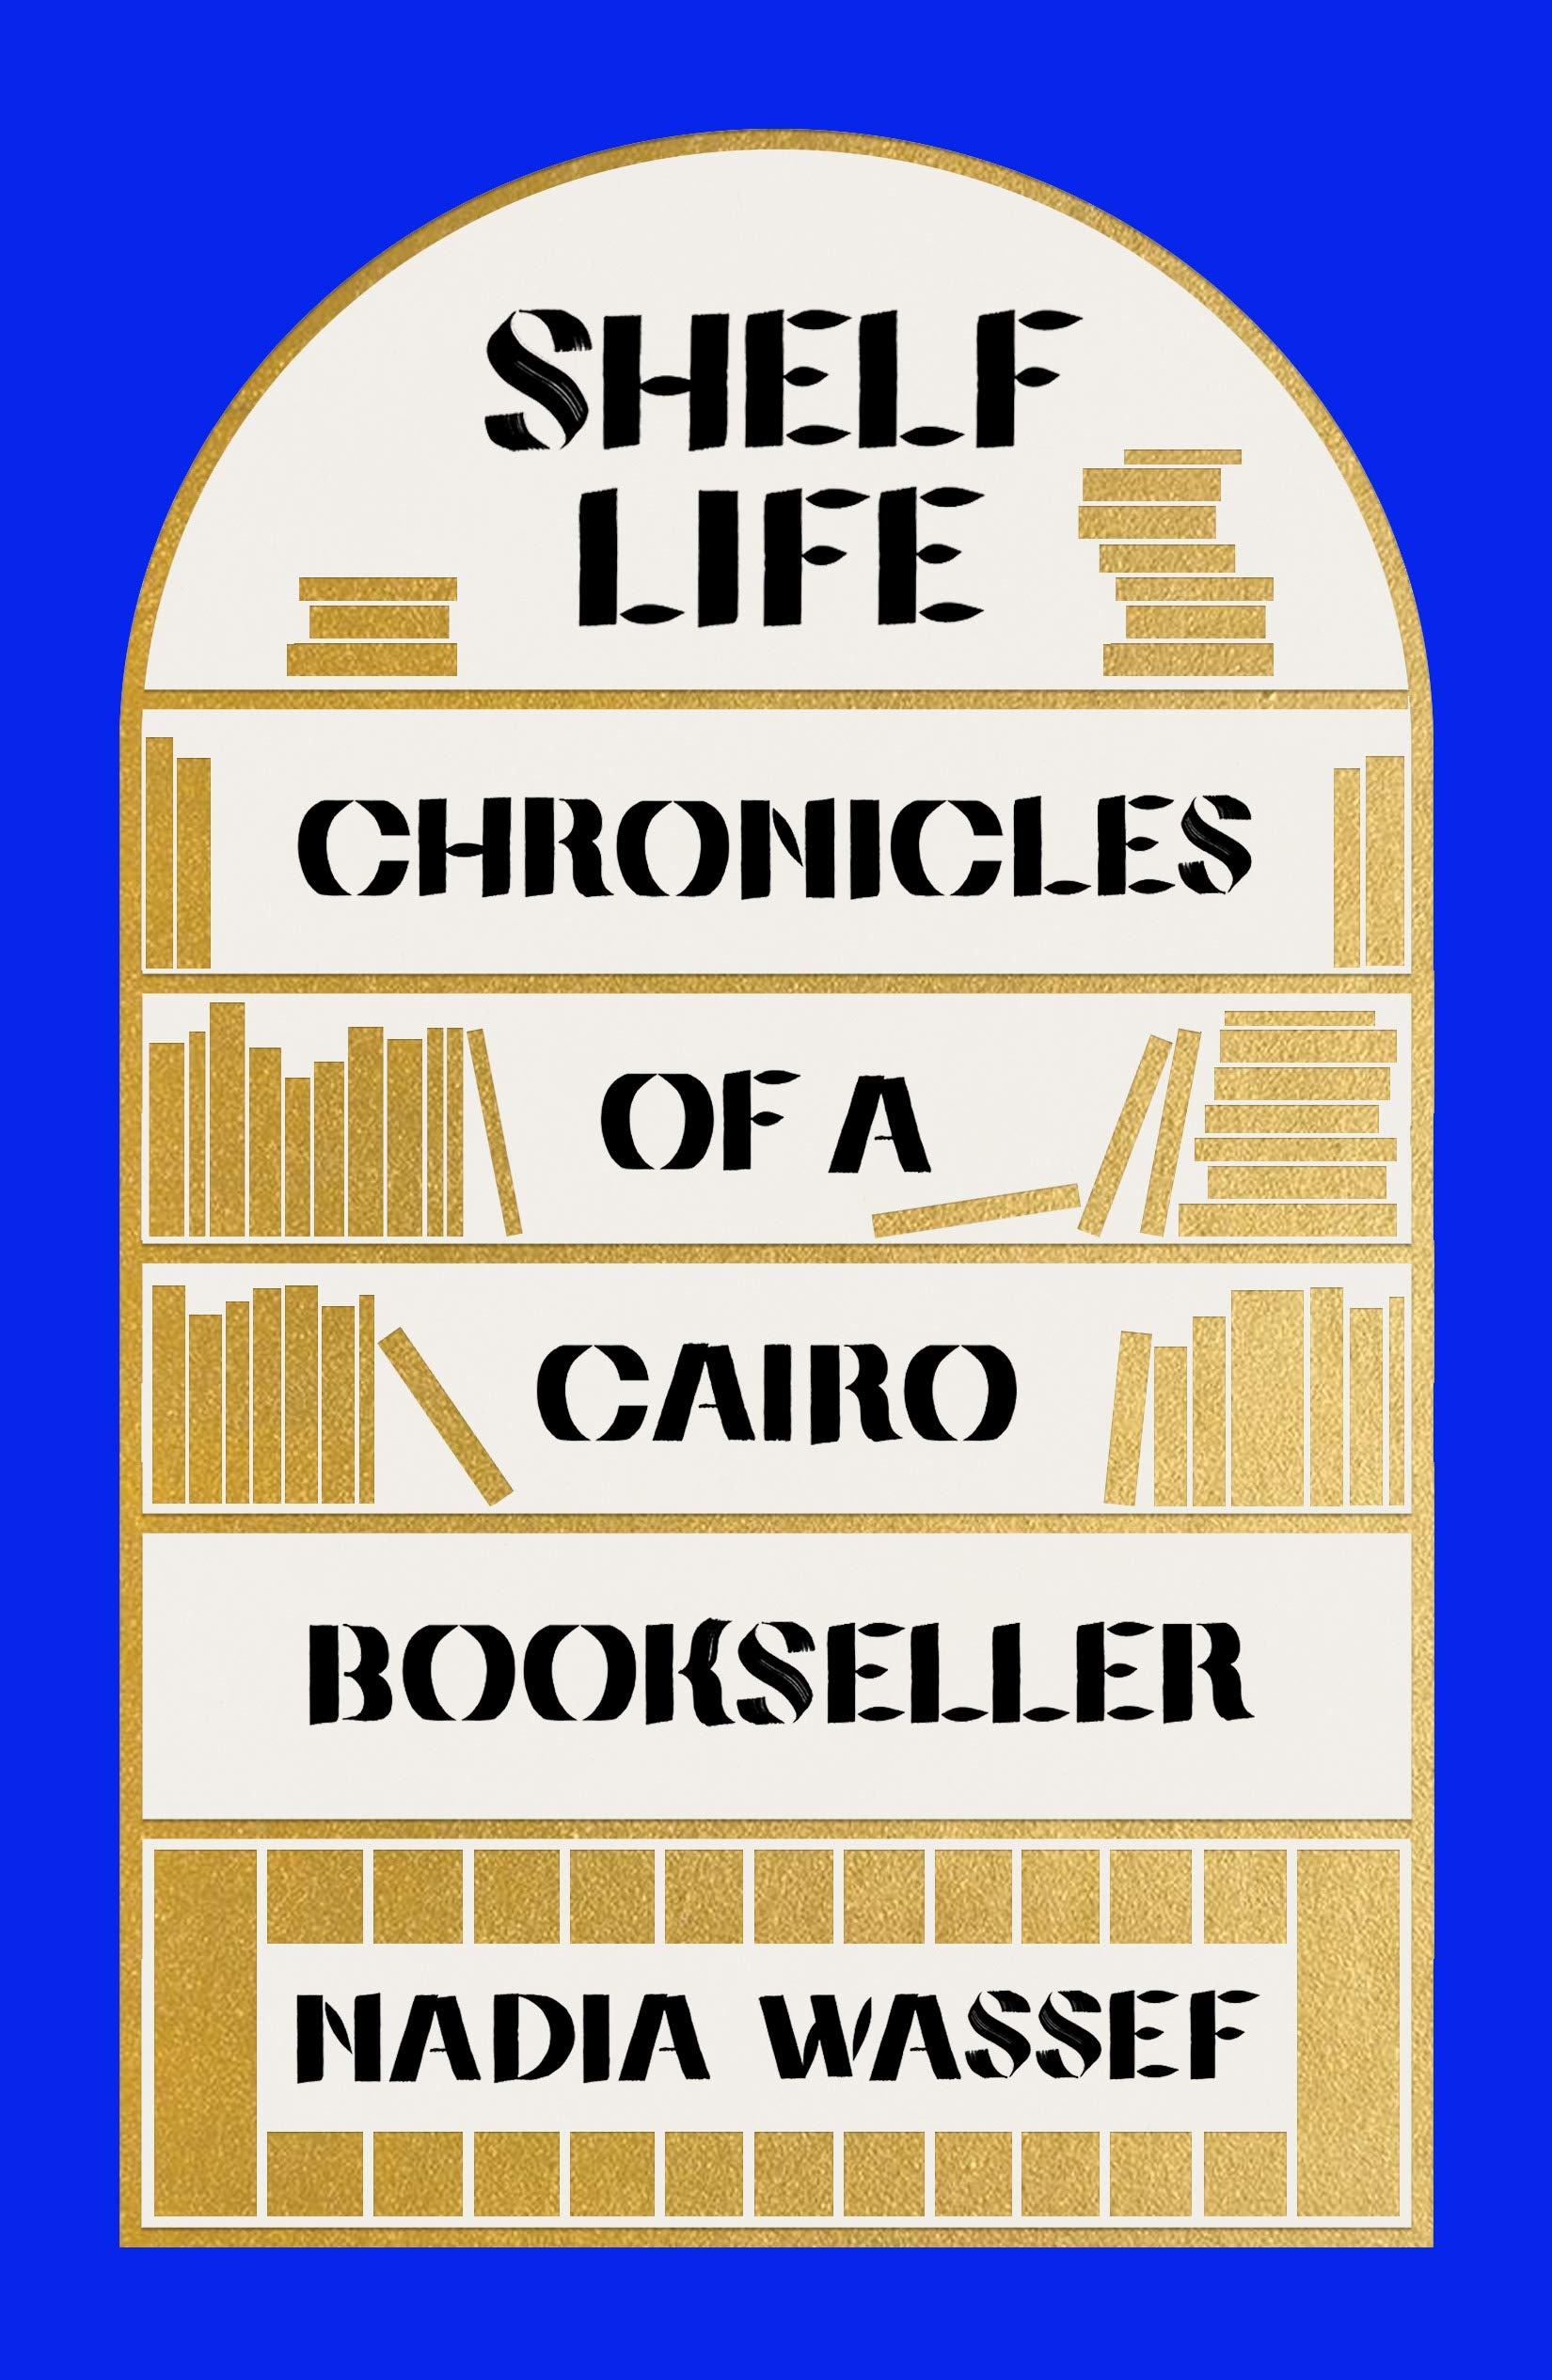 Cover of Nadia Wassef's "Shelf Life: Chronicles of a Cairo Bookseller" (due for release in English on 5 October 2021; published by Farrar, Straus and Giroux)